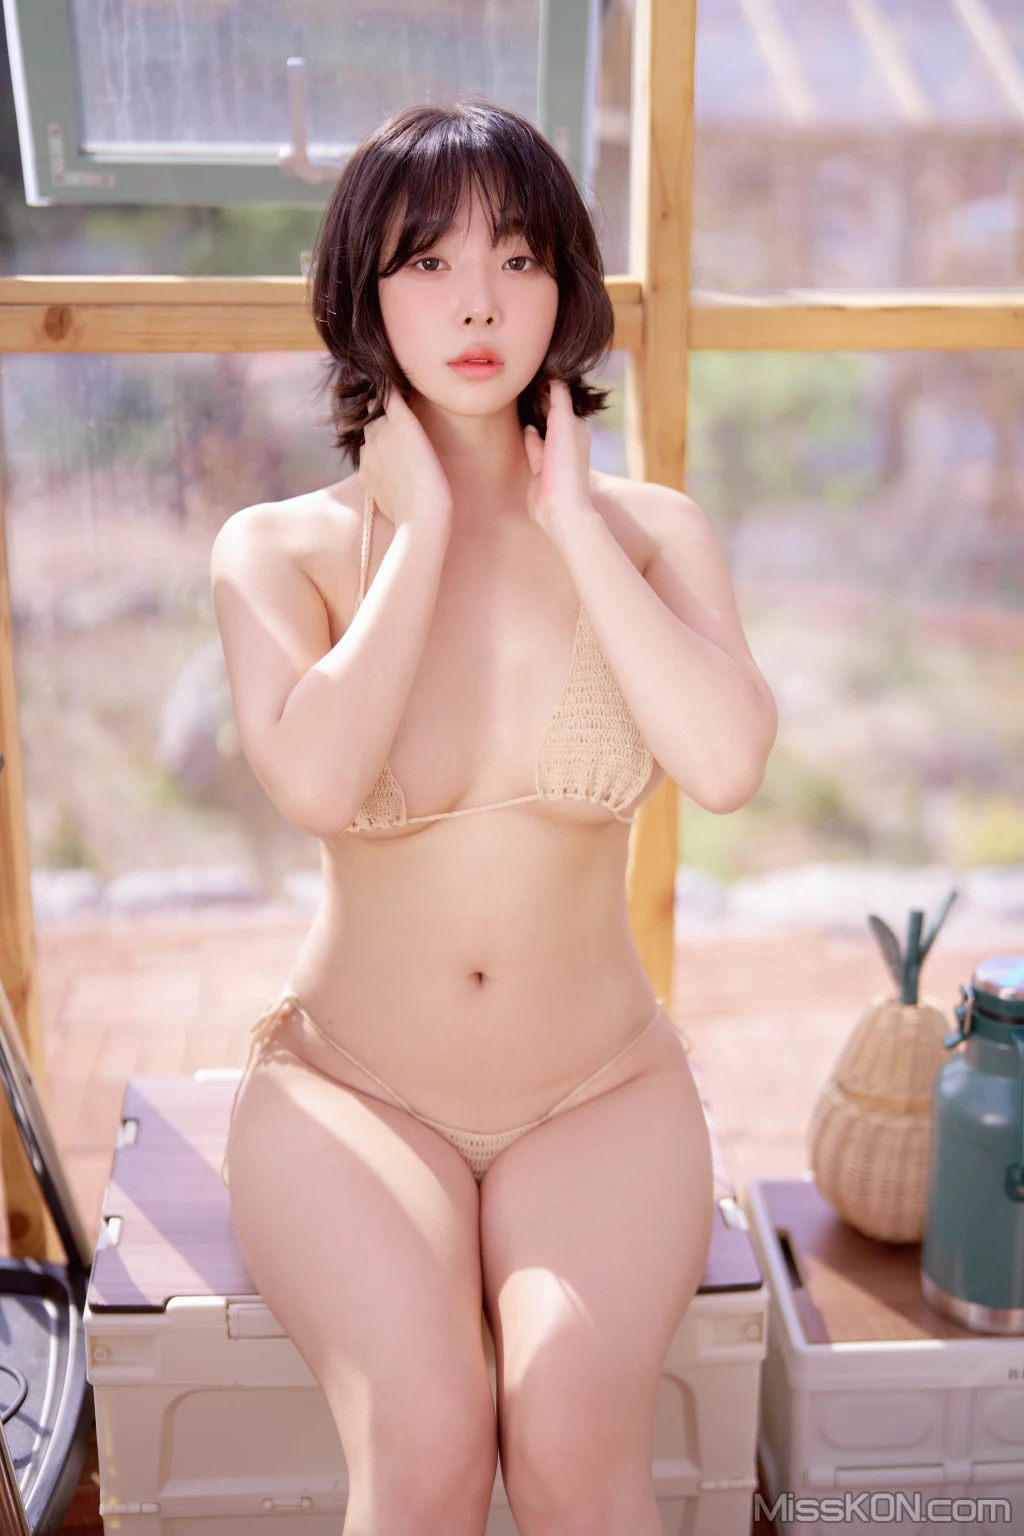 Kang In-kyung (강인경): Girlfriend (108 图 + 2 视频) –插图1